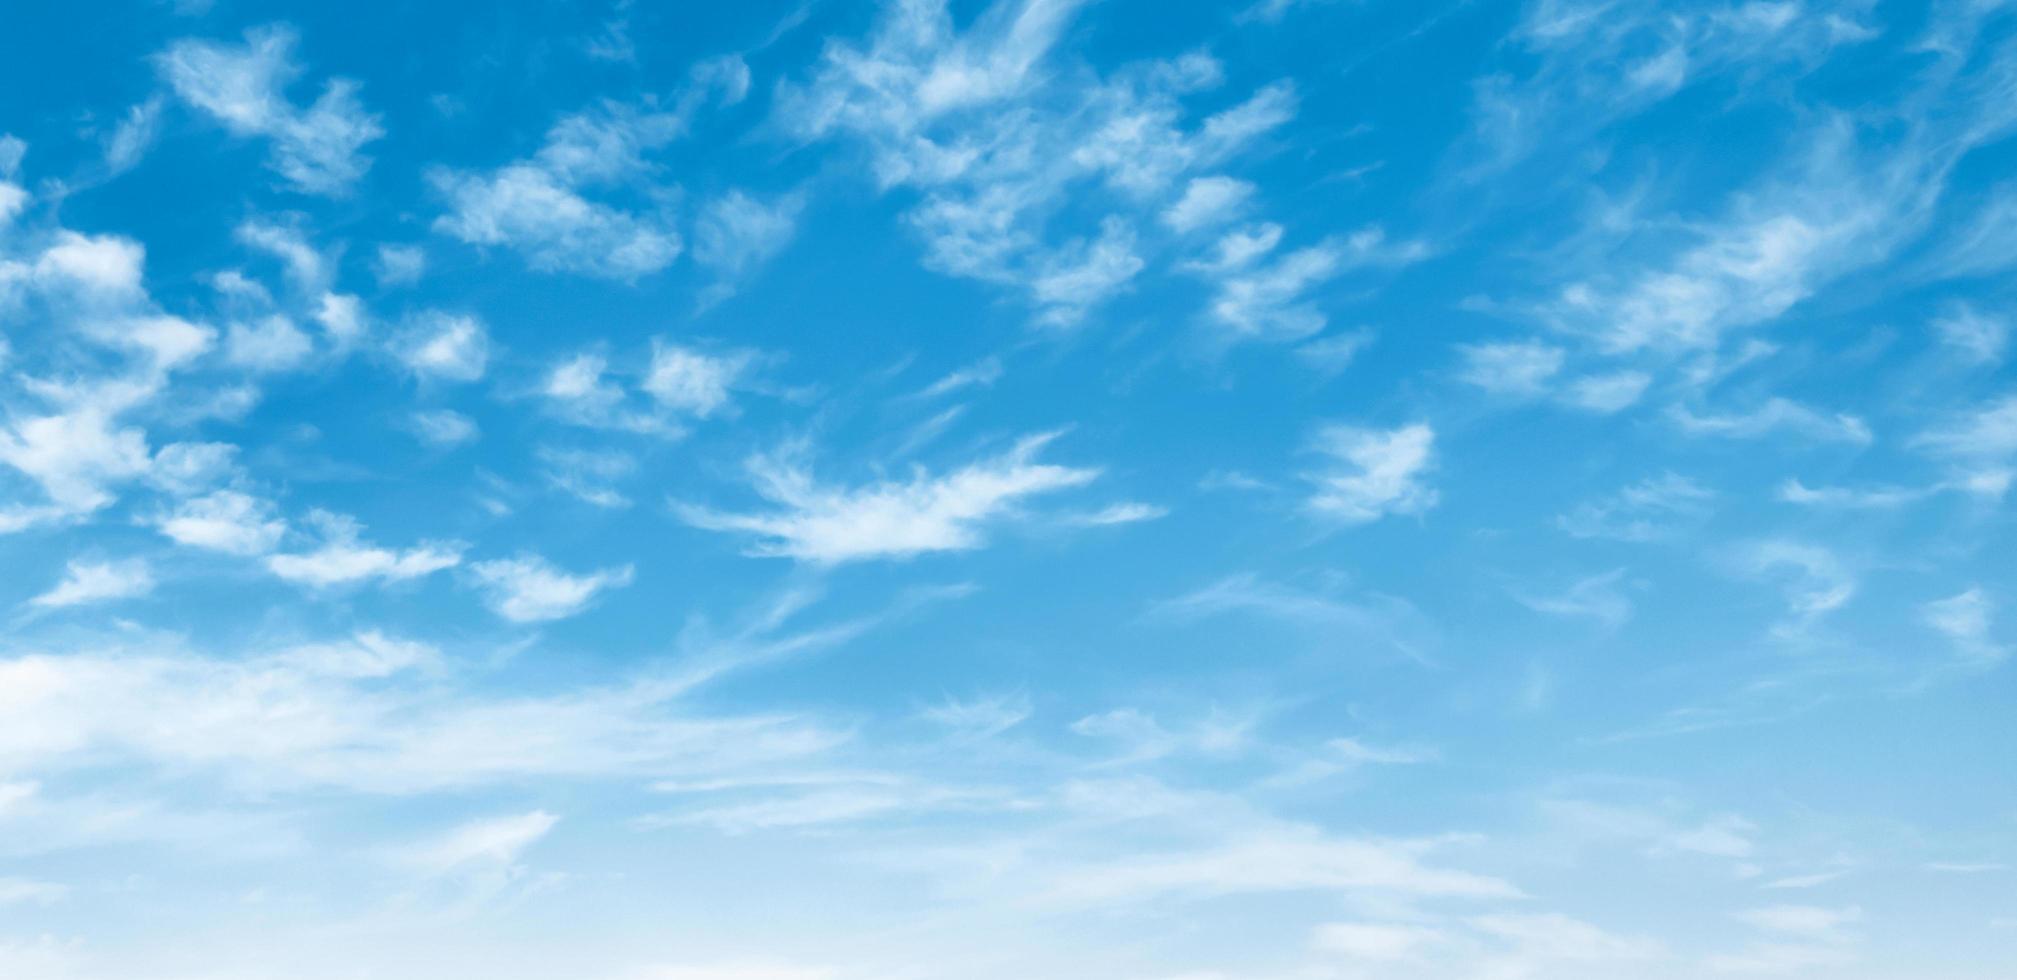 panorama blue sky with white cloud background photo